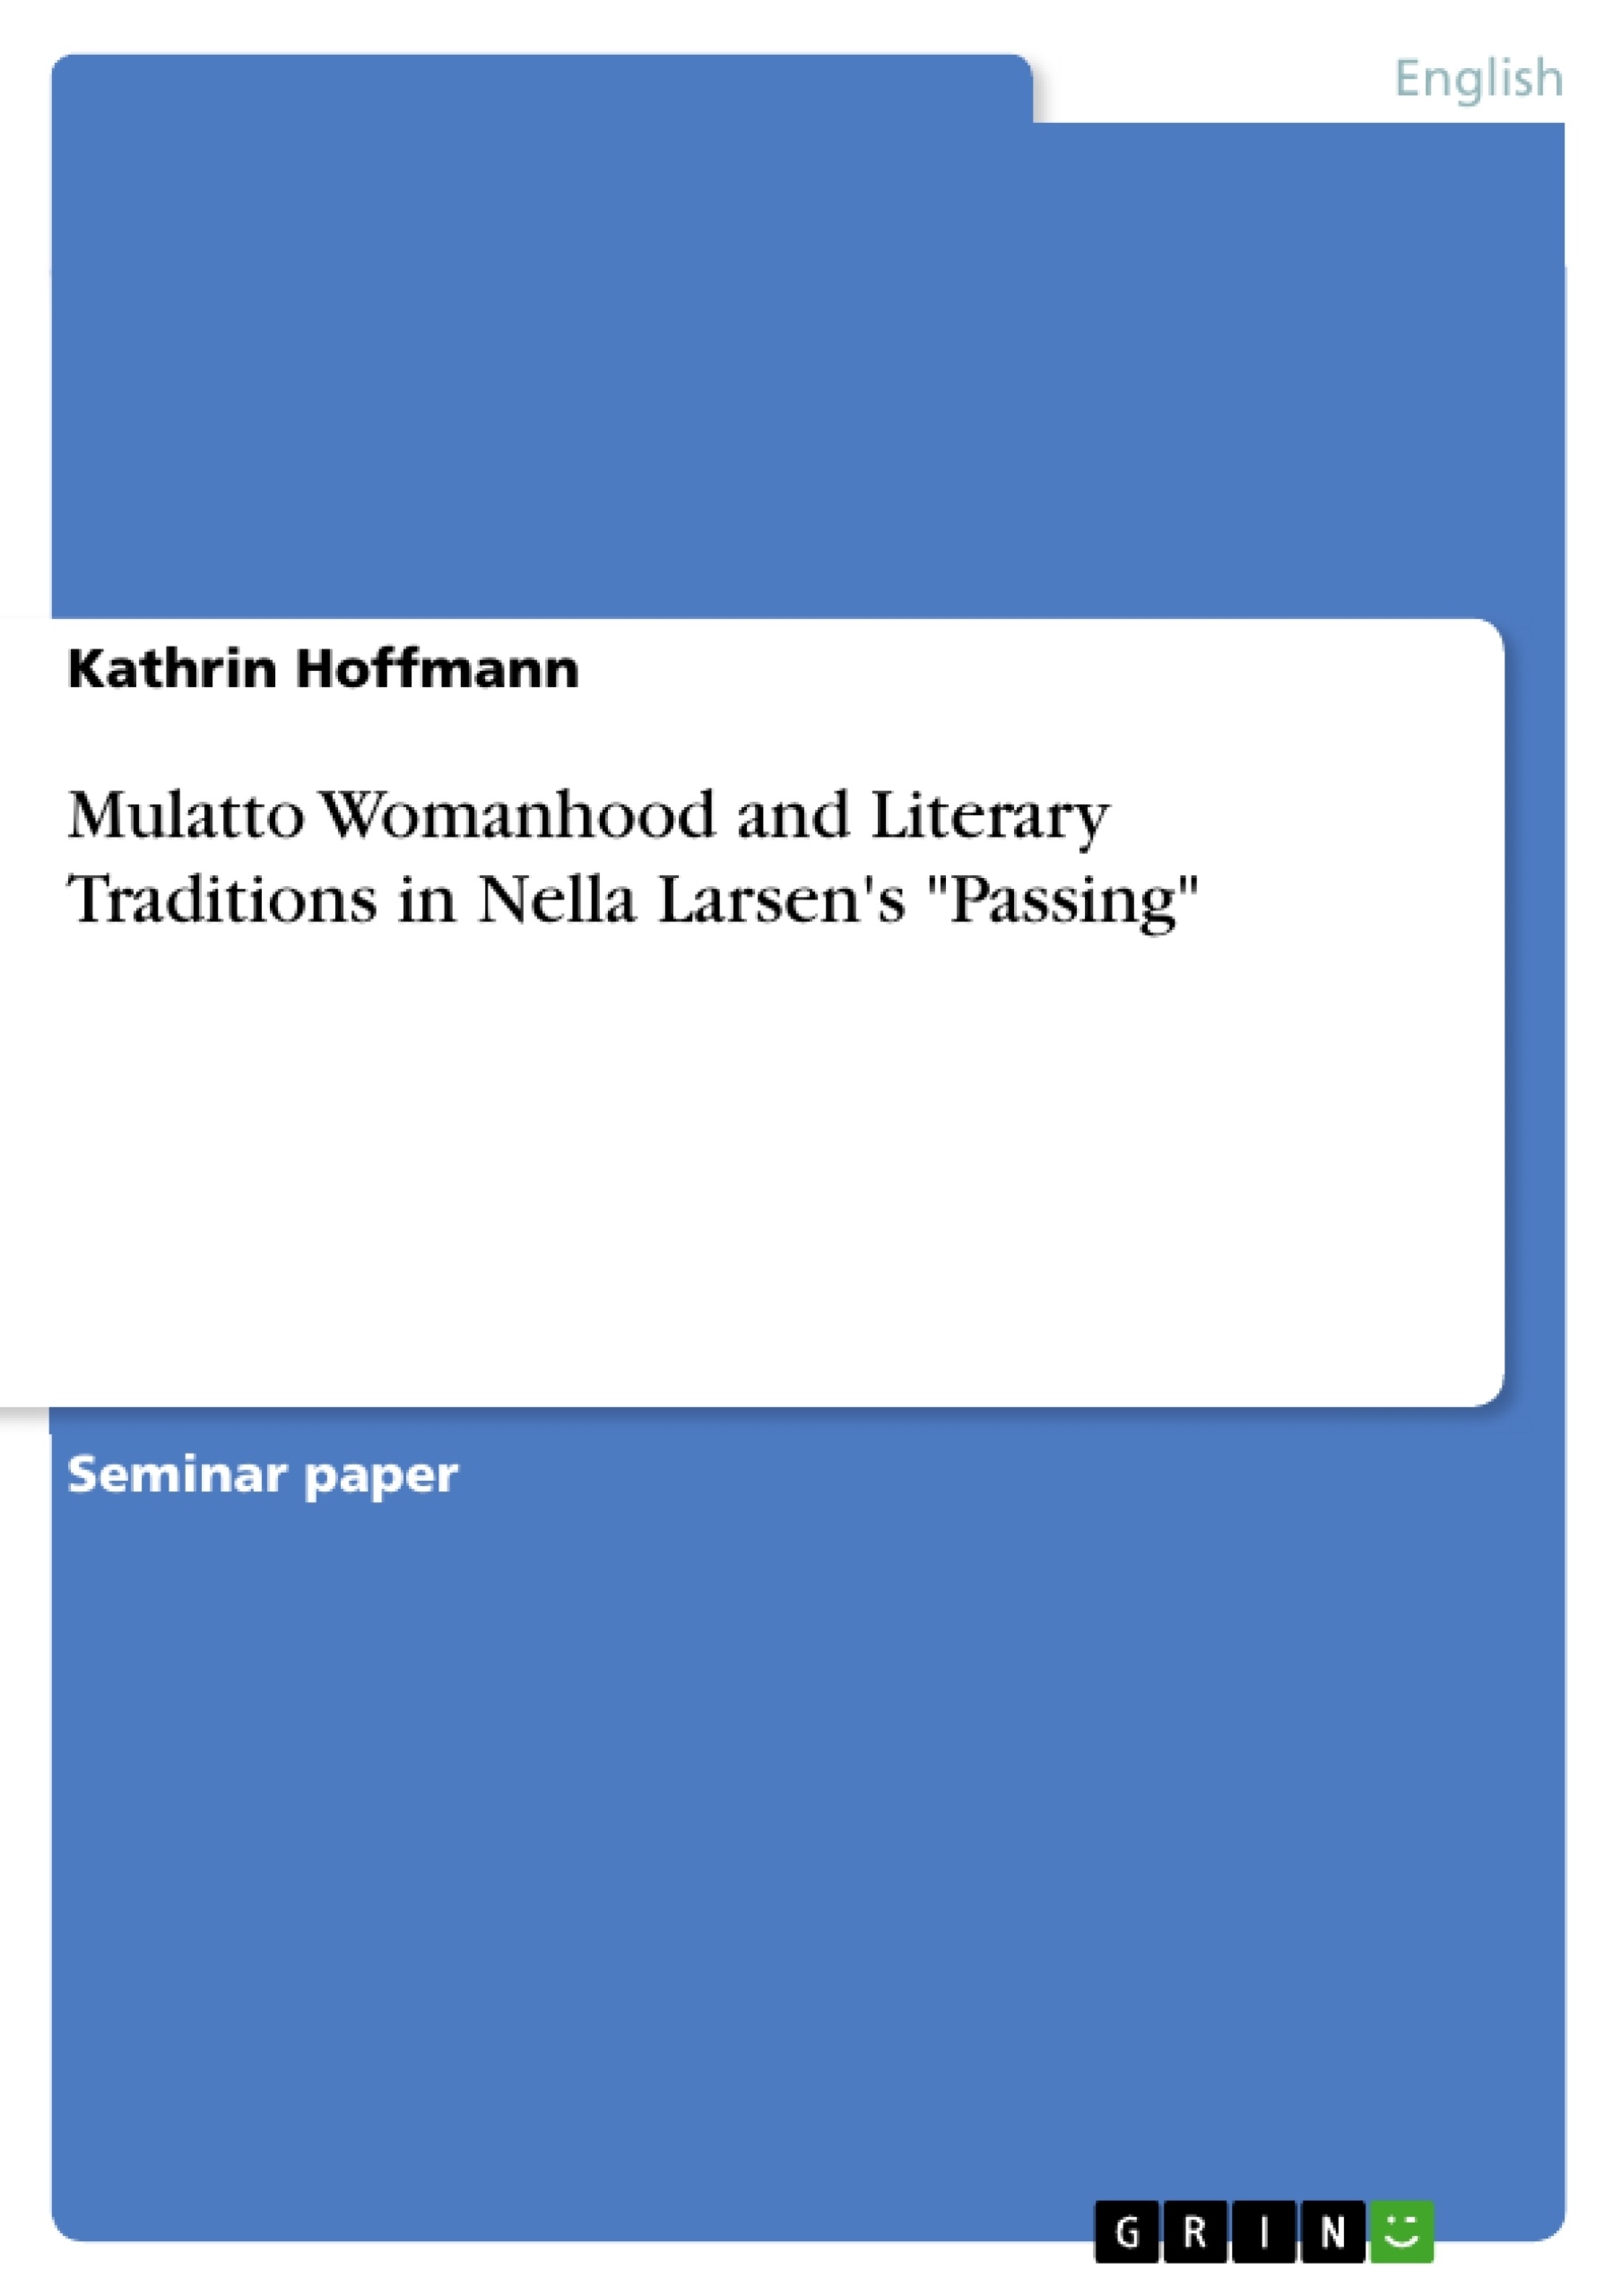 Título: Mulatto Womanhood and Literary Traditions in Nella Larsen's "Passing"